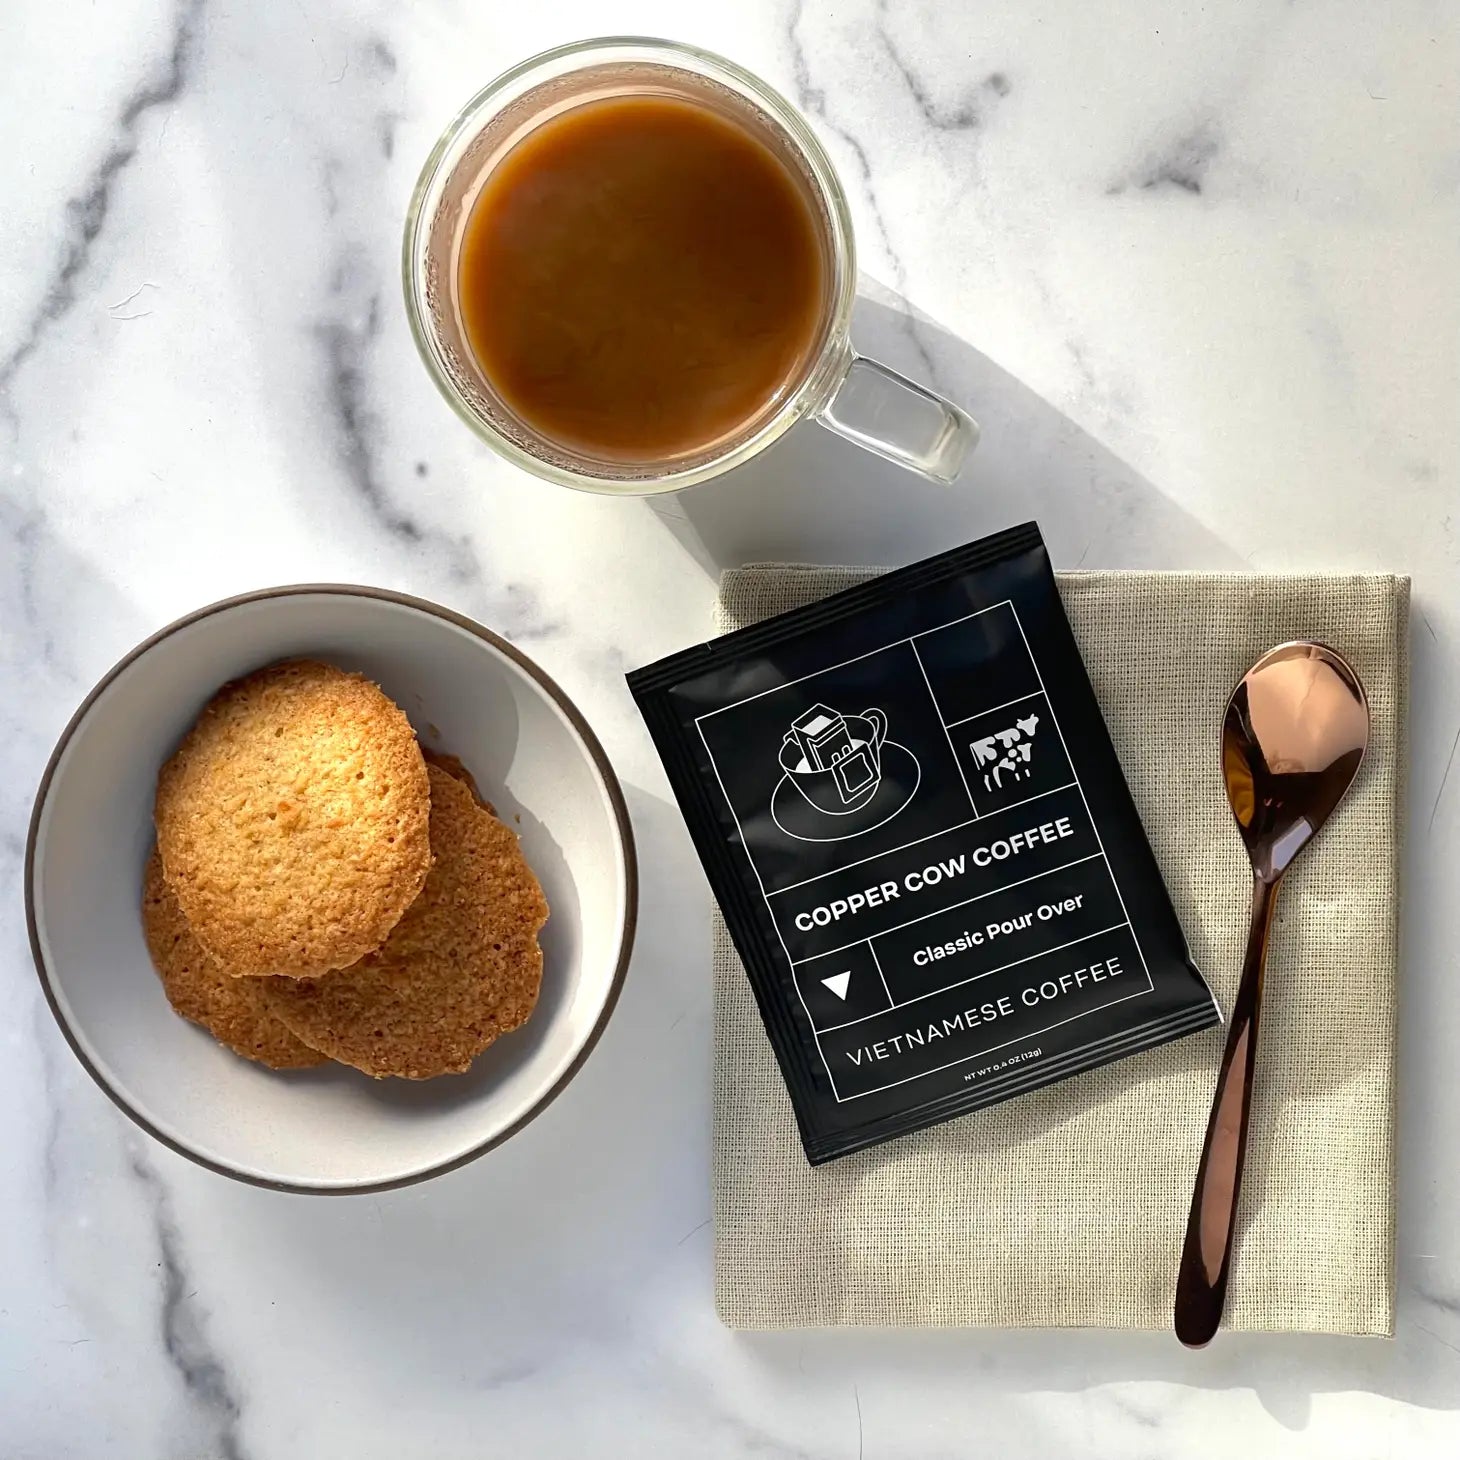 Black packaging for single serving coffee next to a spoon, plate of cookies and mug of coffee.